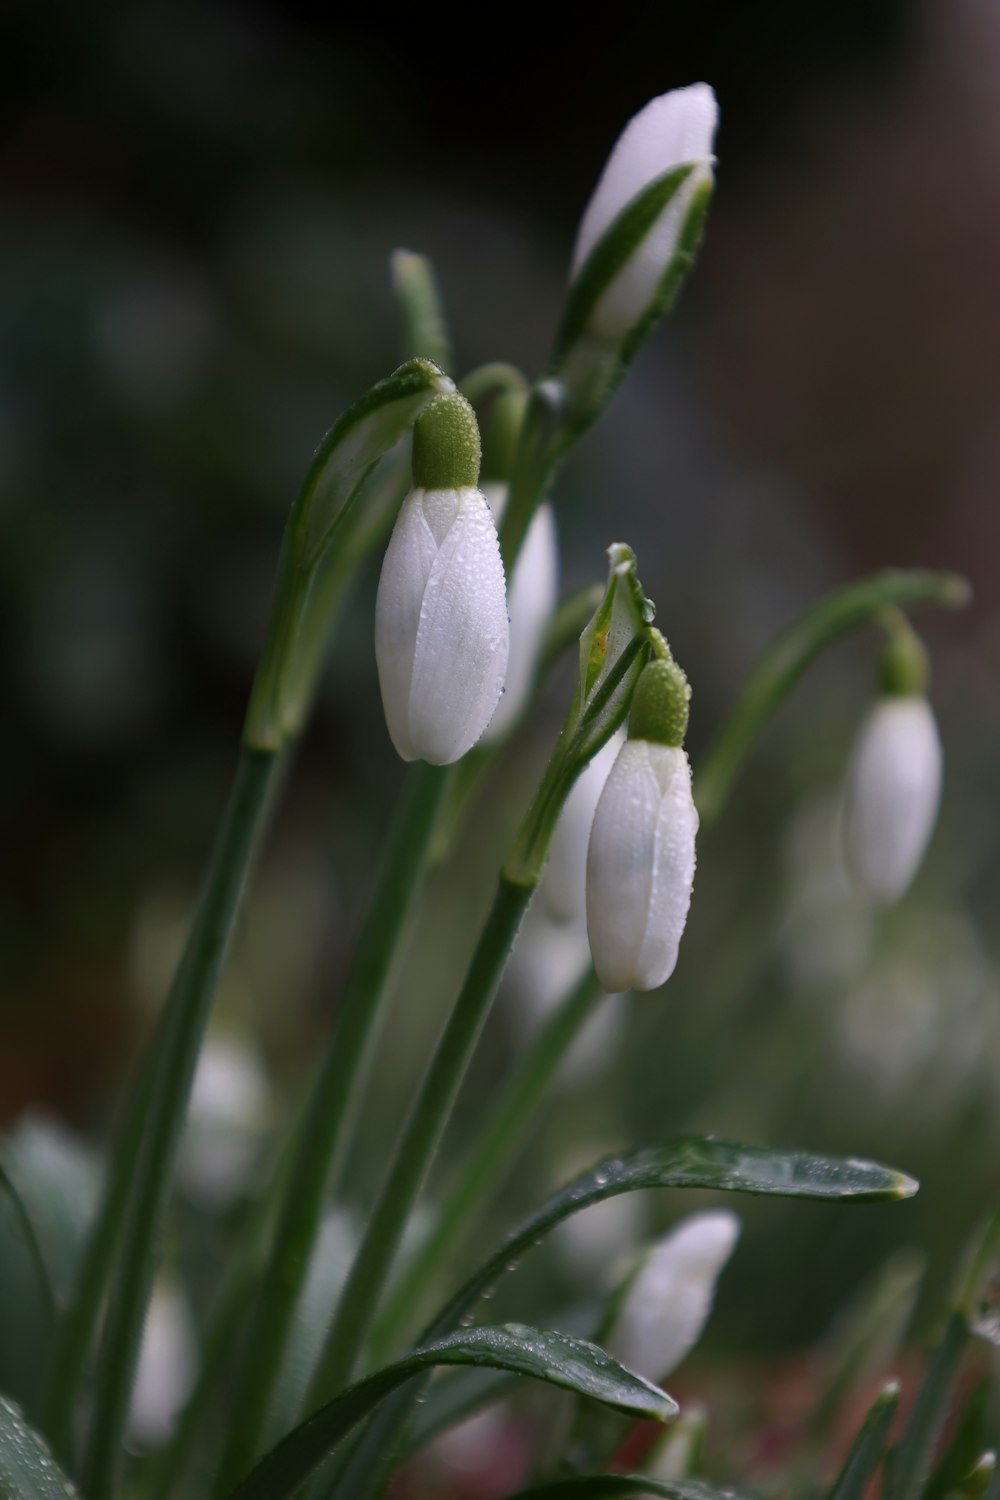 a group of white flowers with green stems